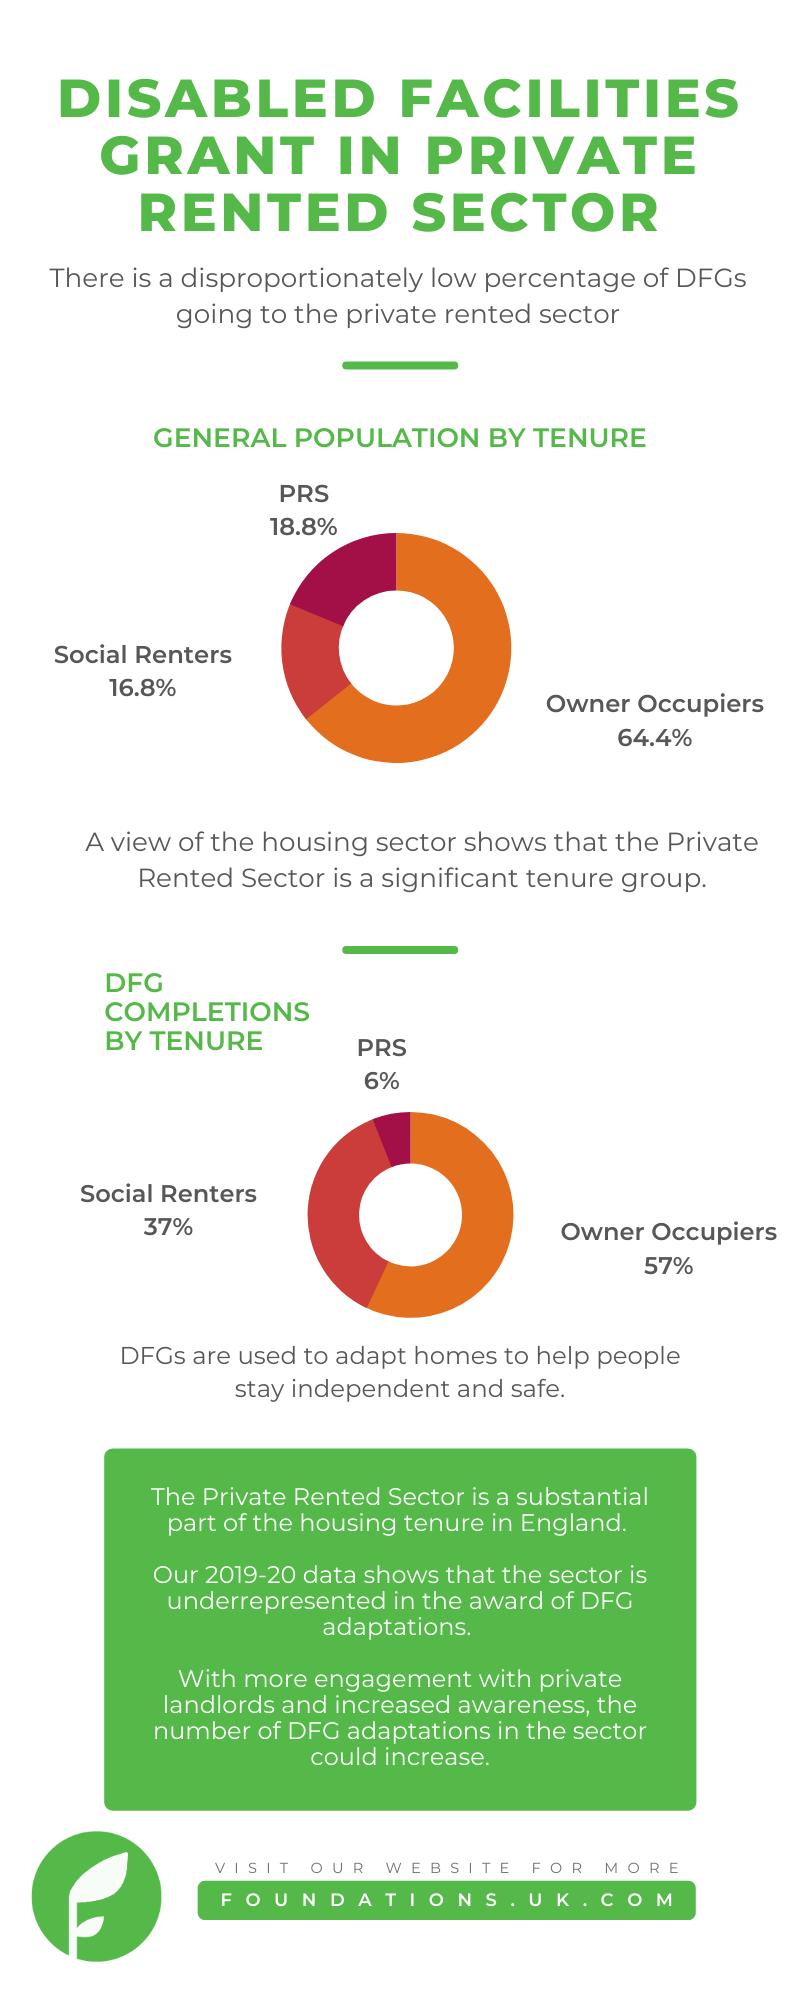 FoundationsHIA disabled facilities grant in the private rented sector statistics